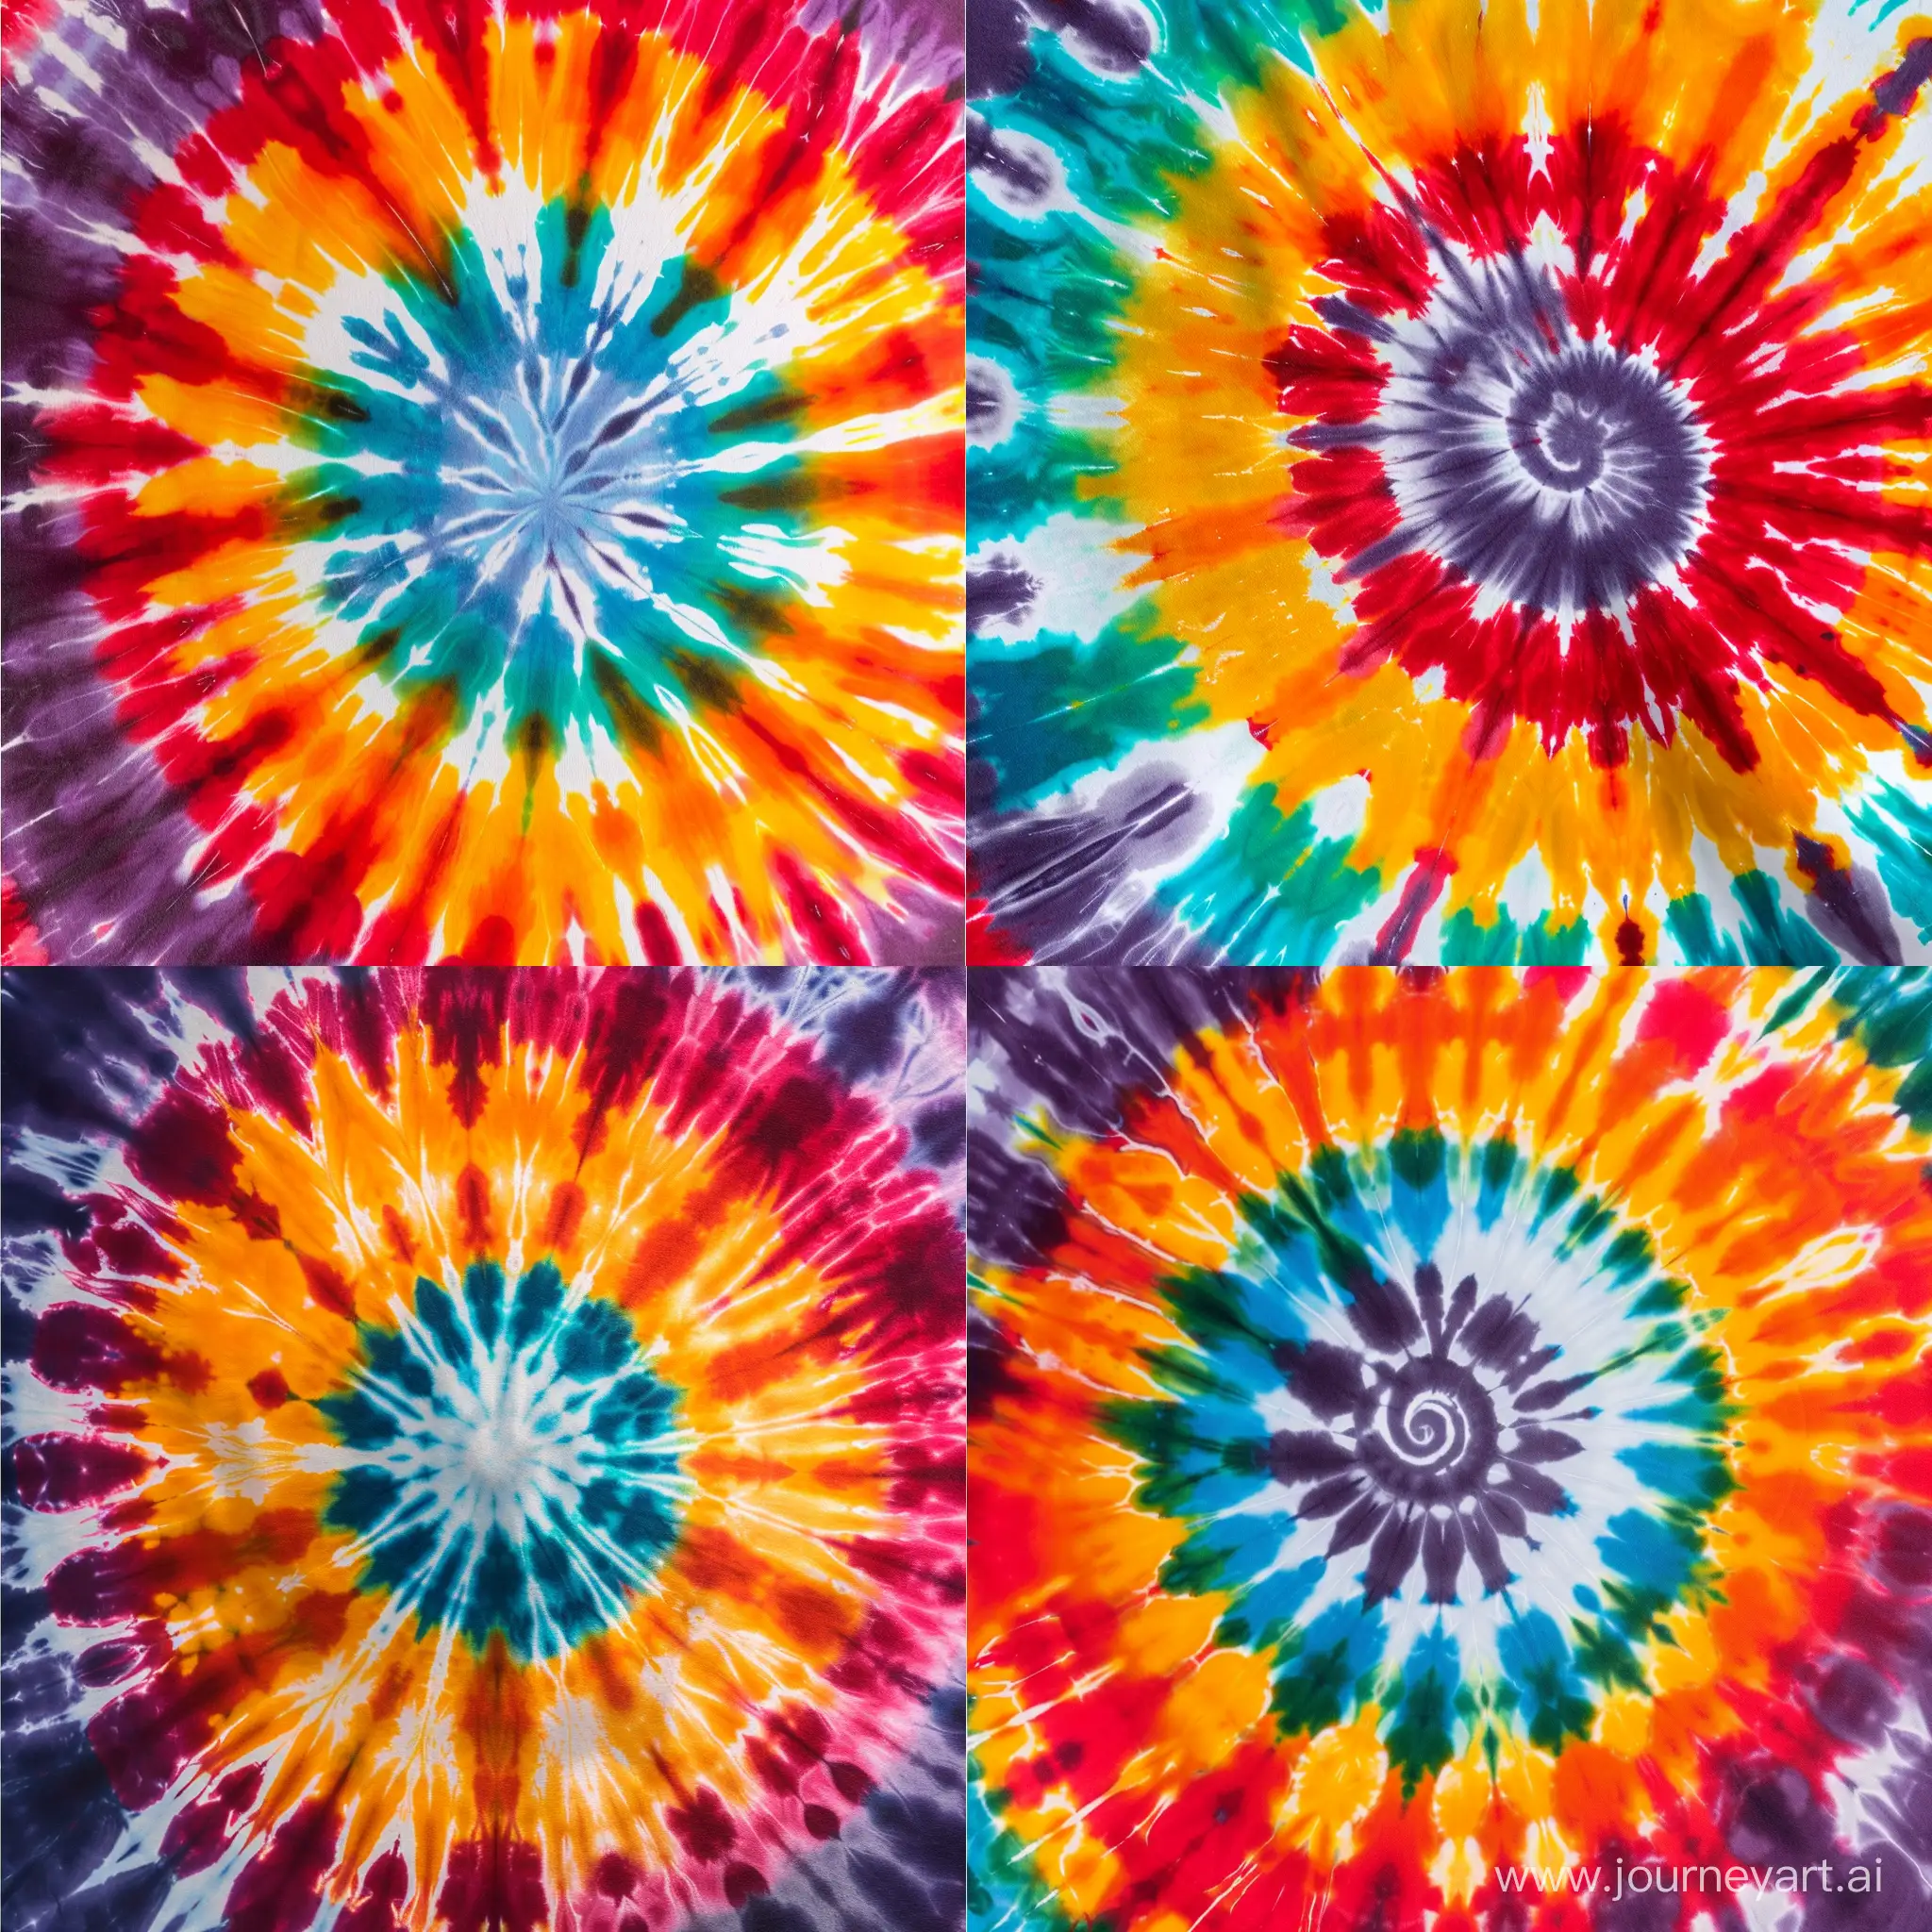 a classic tie dye pattern with bright vibrant colors swirling out from the center